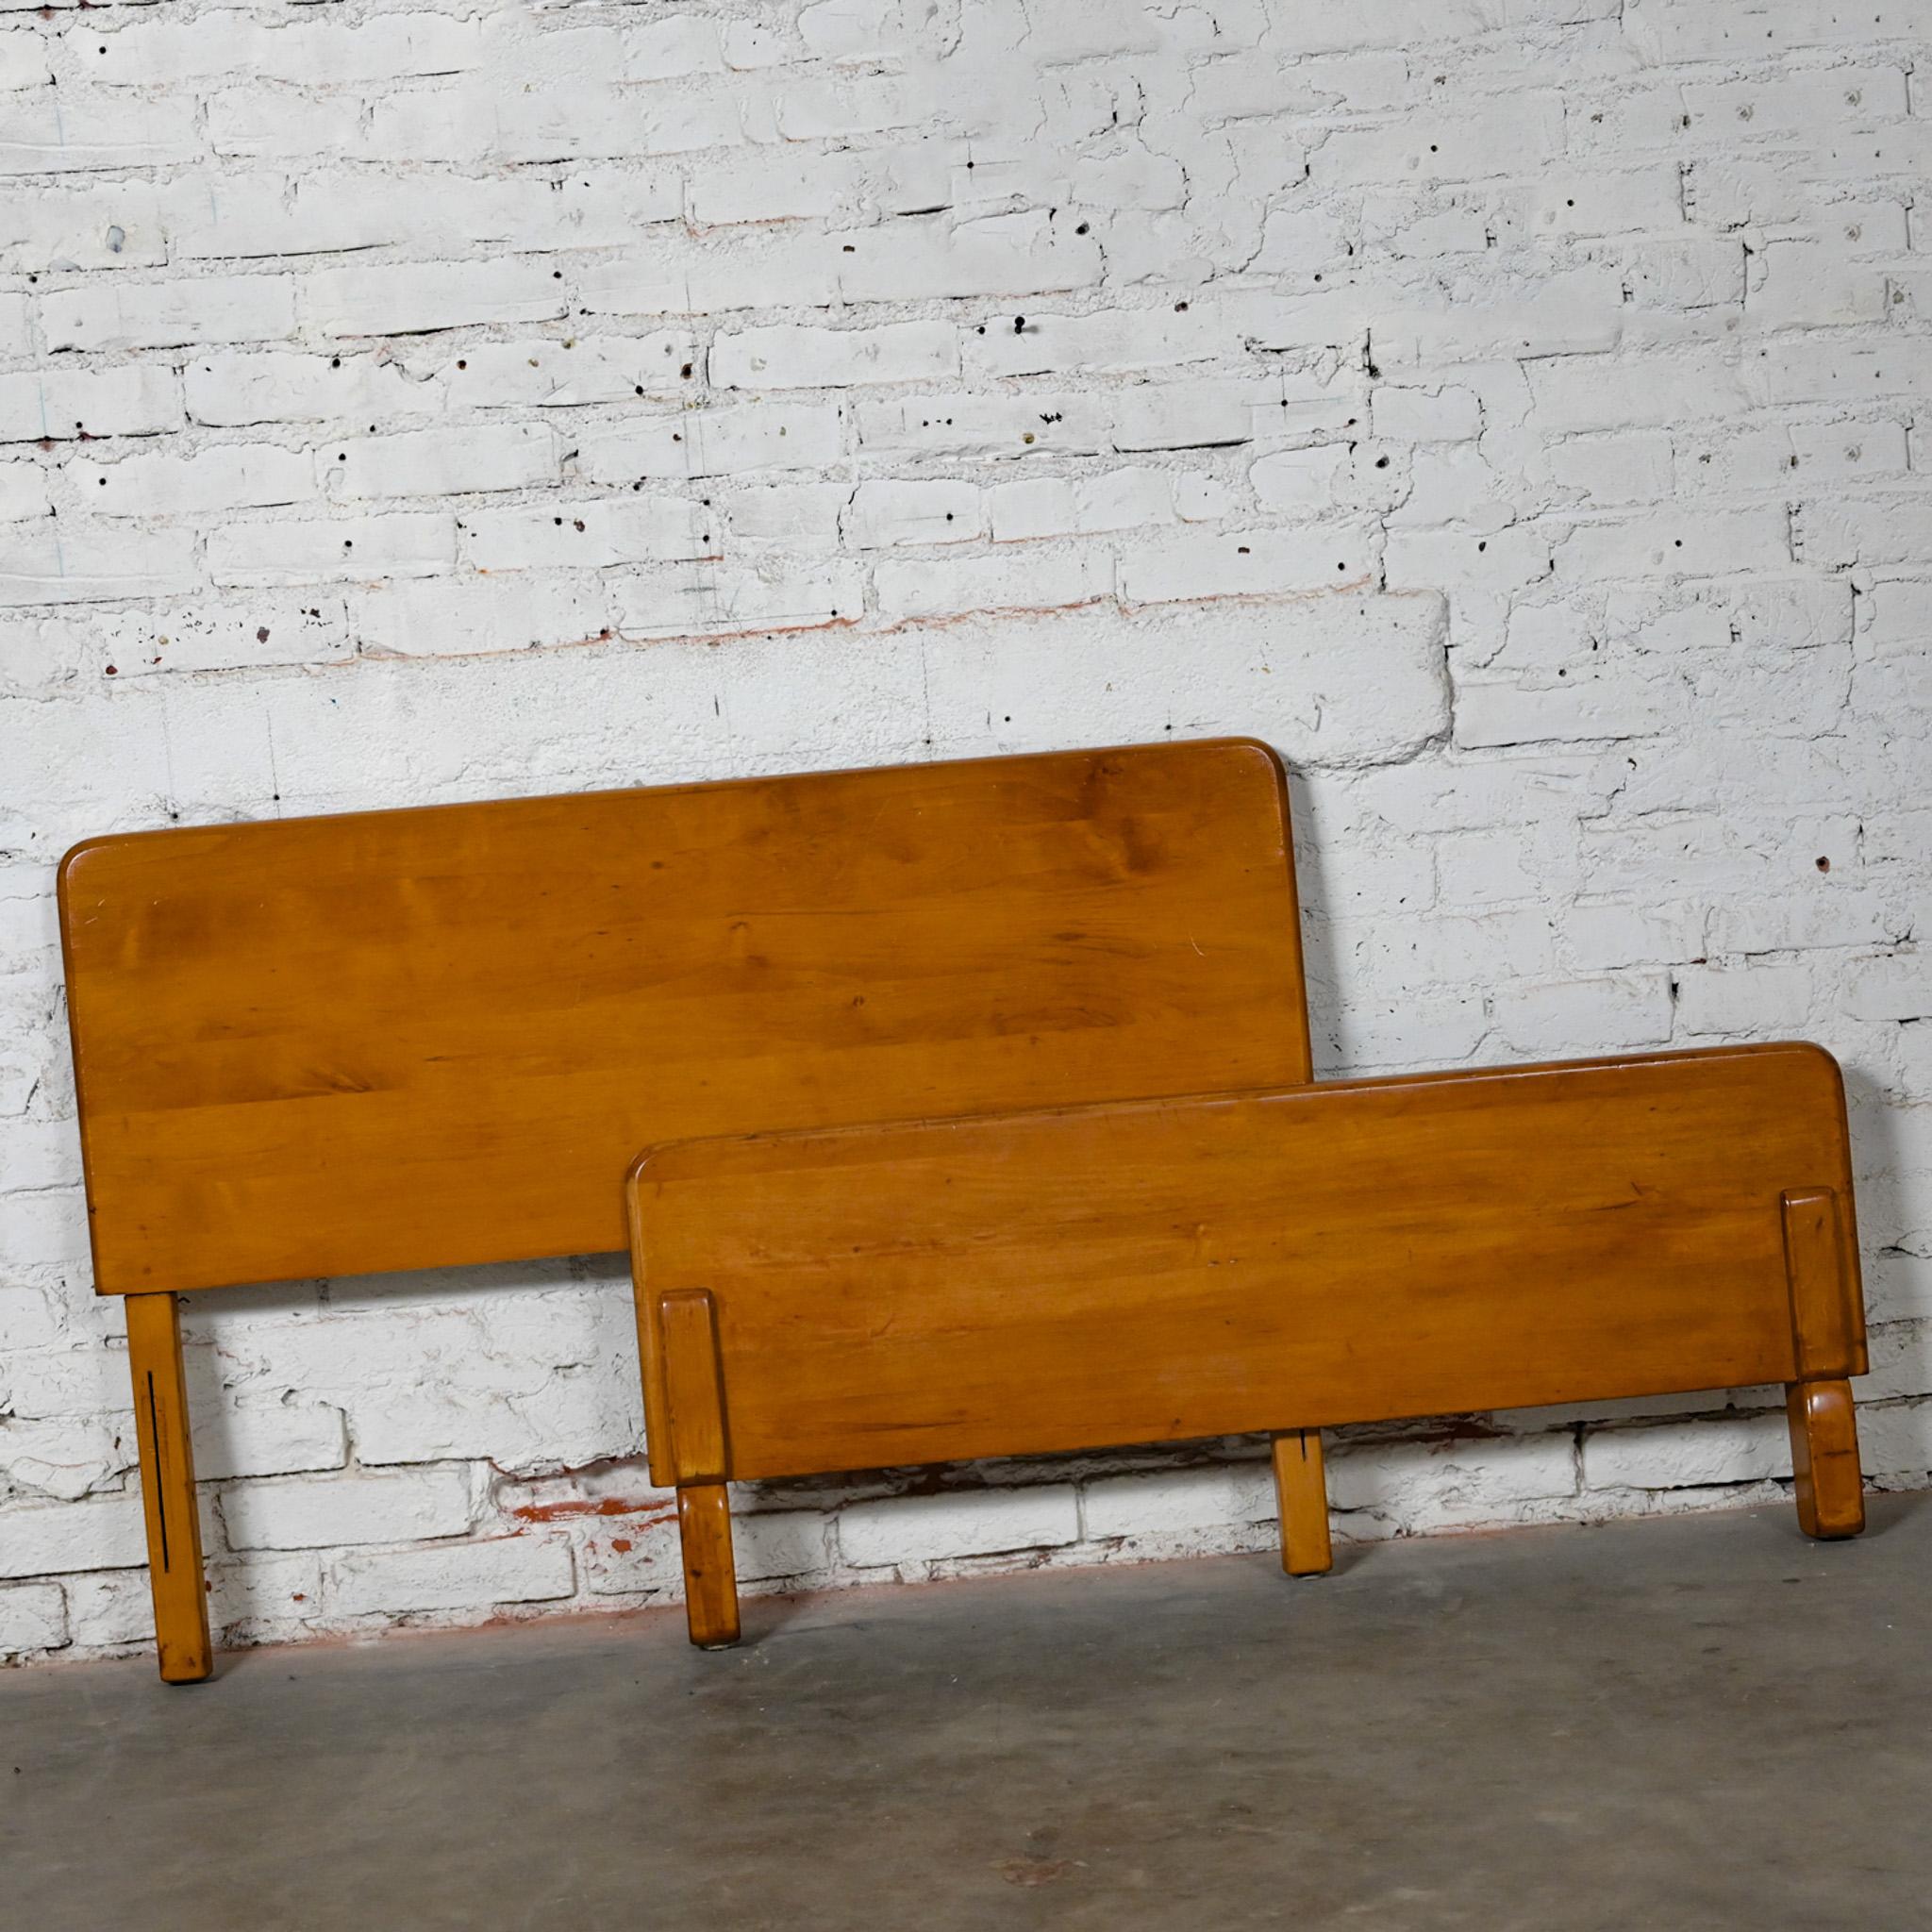 Handsome Early-Mid-20th Century Art Moderne solid maple twin bed headboard & footboard in the style of Bissman and after Russel Wright for Conant Ball. This piece has been attributed based upon archived research including online sources, vintage